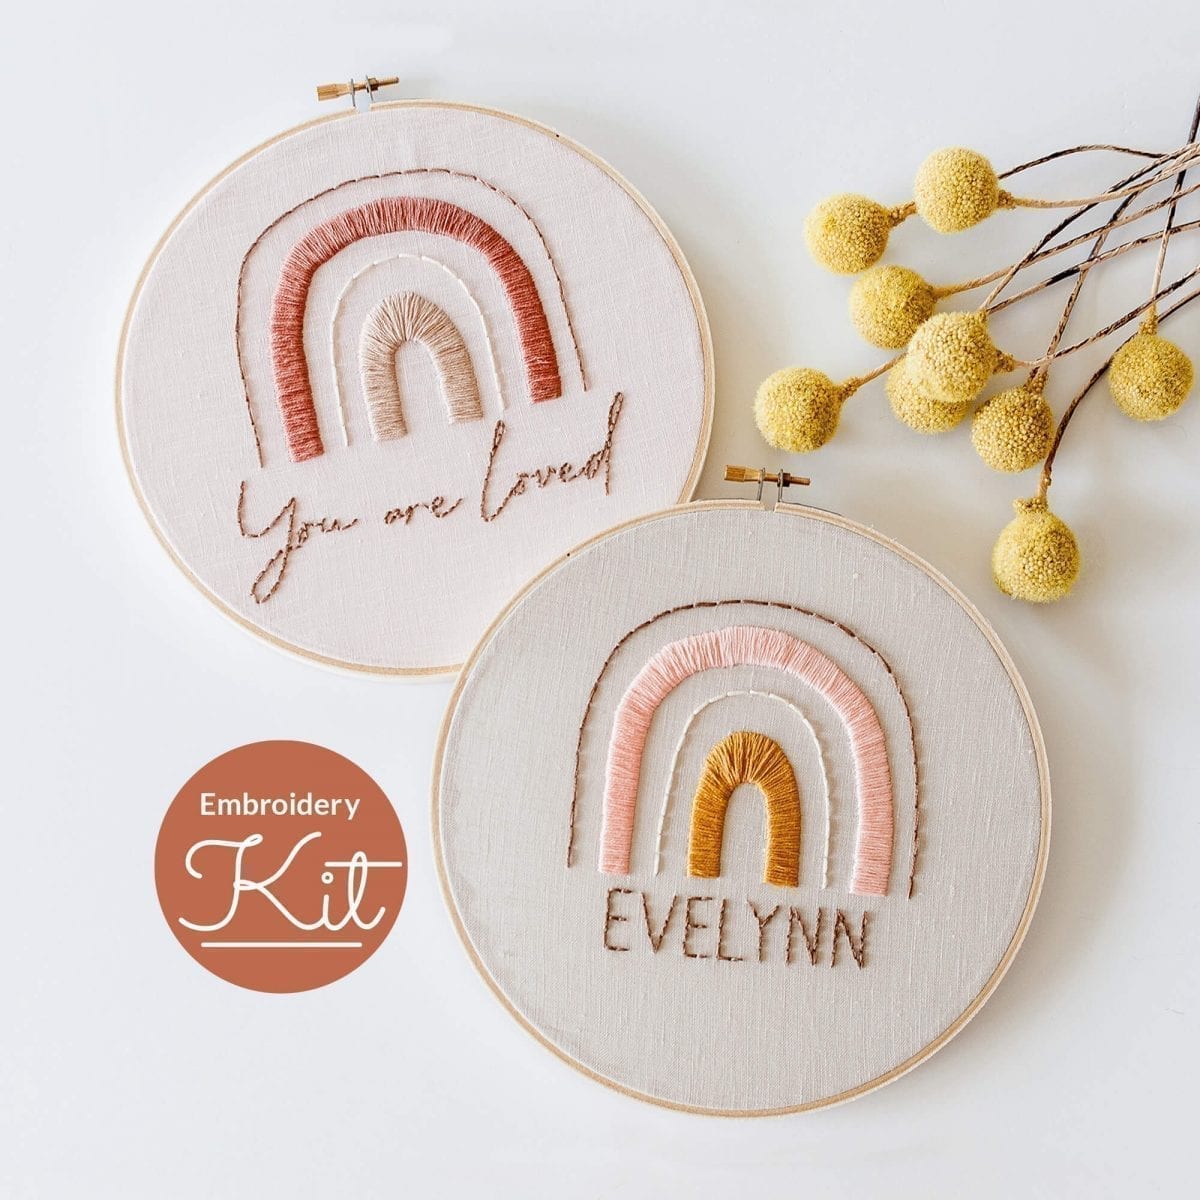 Rainbow Embroidery Kit Do It Yourself